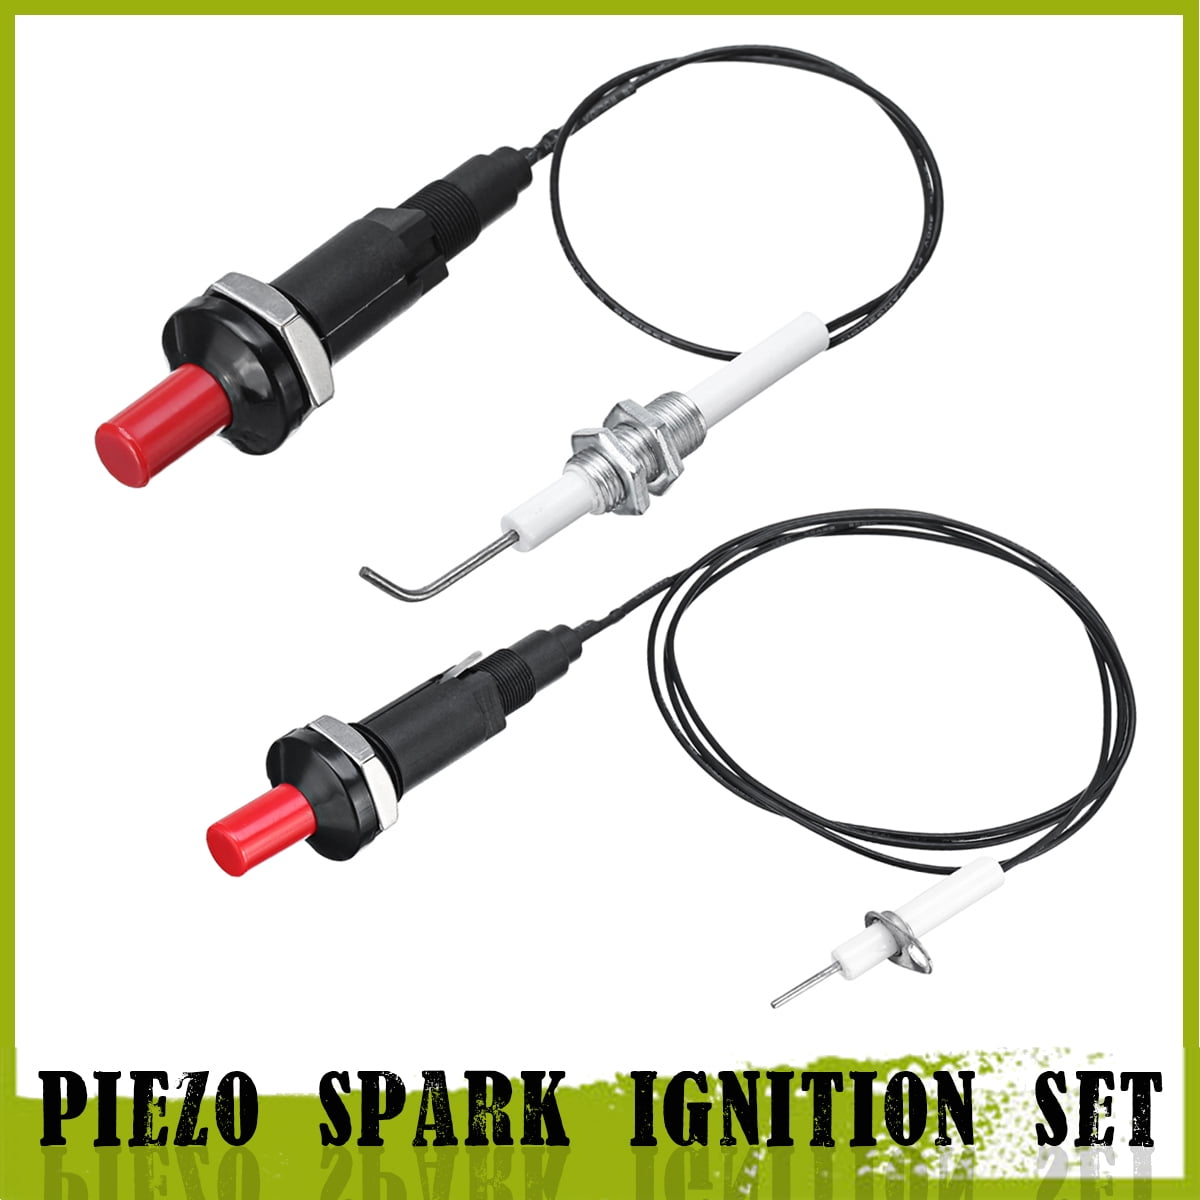 Universal Piezo Spark Ignition Set Kitchen Cable Lighter For Gas Grill Oven BBQ 